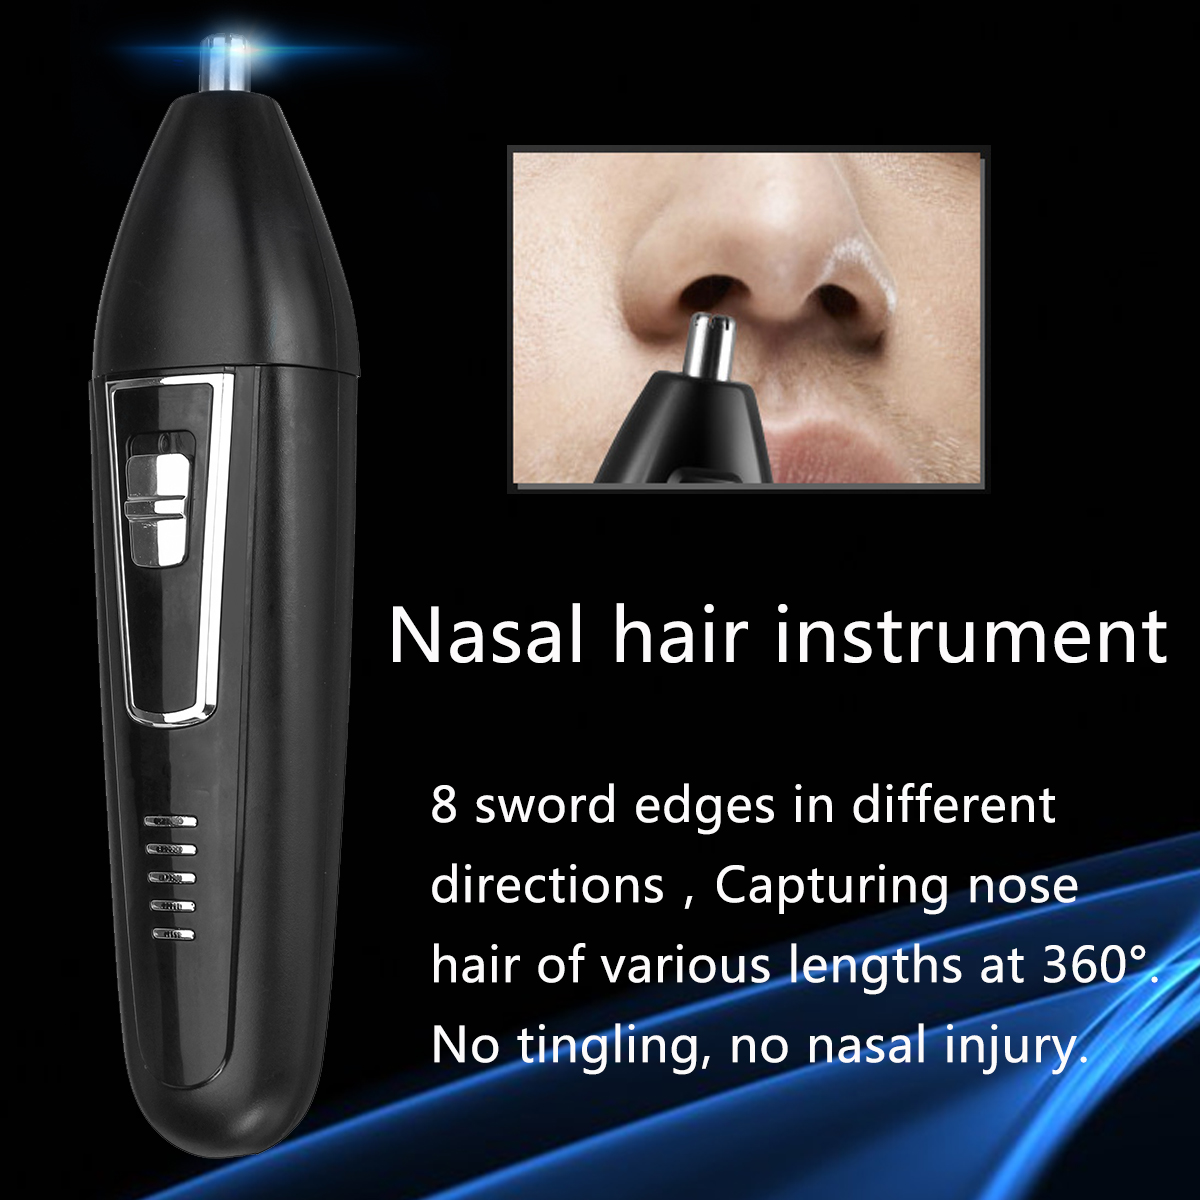 3-In-1-Reciprocating-Electric-Shaver-Electric-Razor-Shaver-Rotary-Shaver-Portable-Face-Shaver-Rechar-1414780